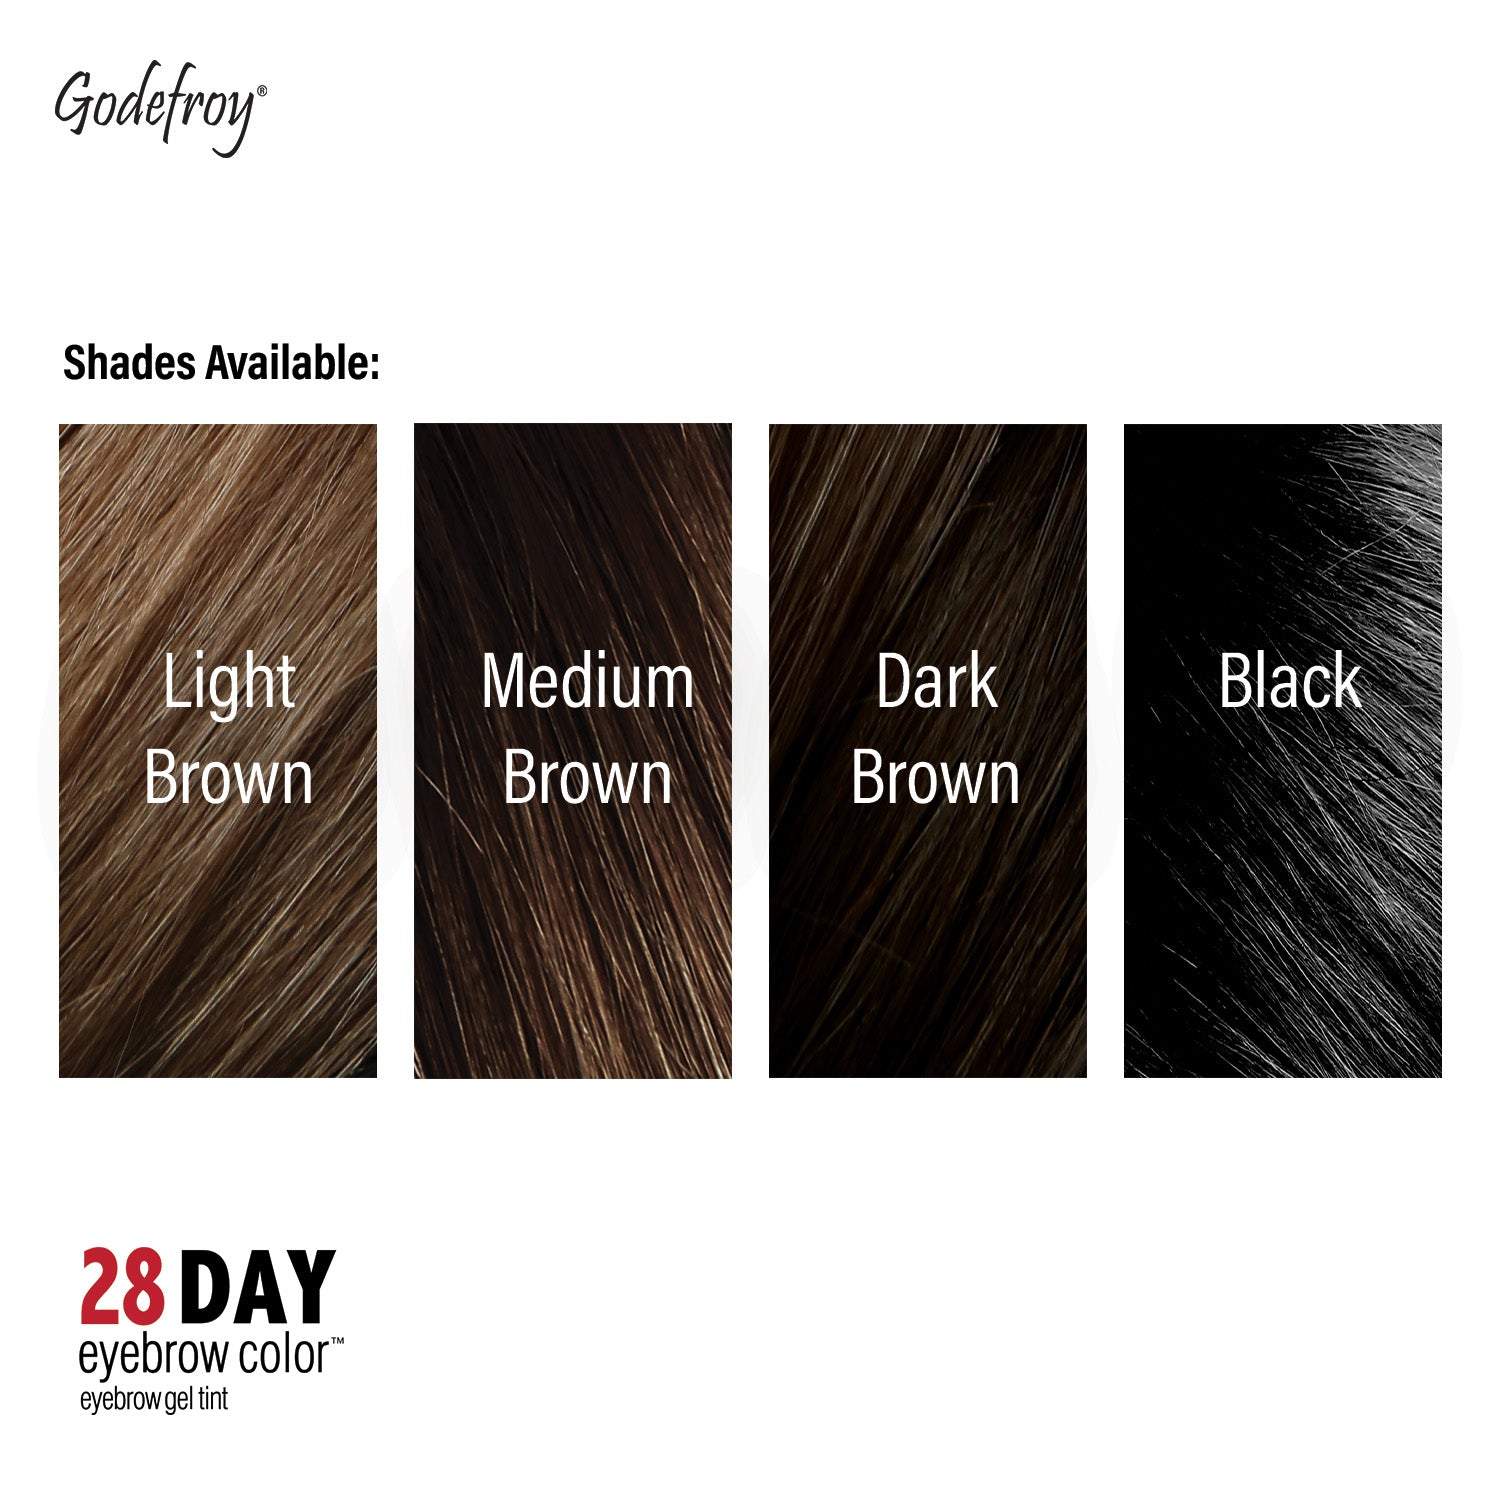 4 shades available for 28 day eyebrow color